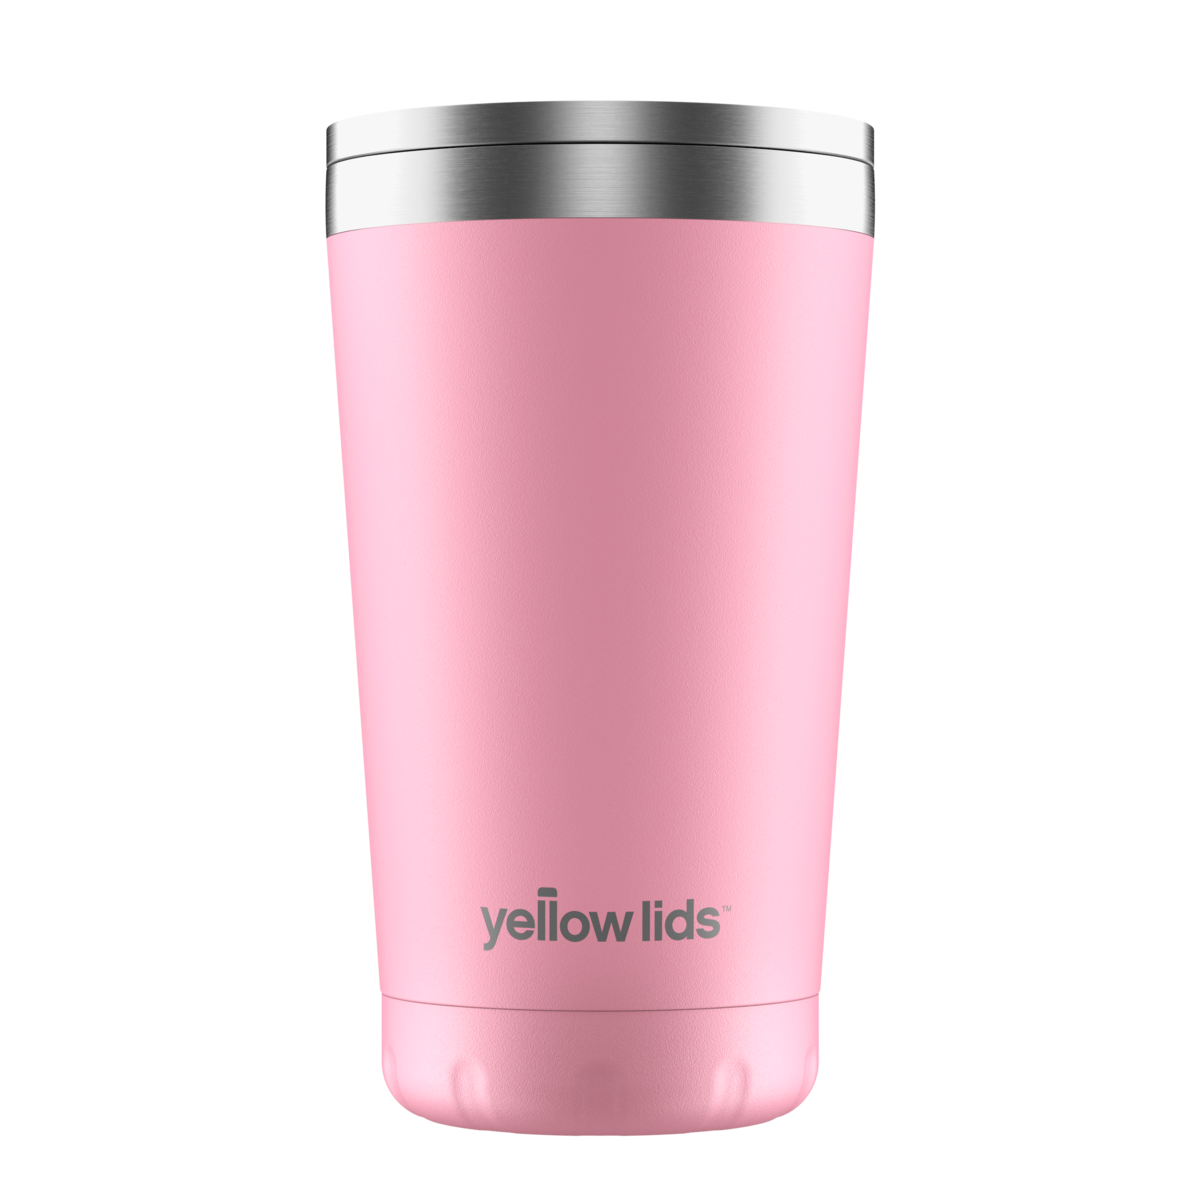 yellowlids_Cup450mlPinkFront.png